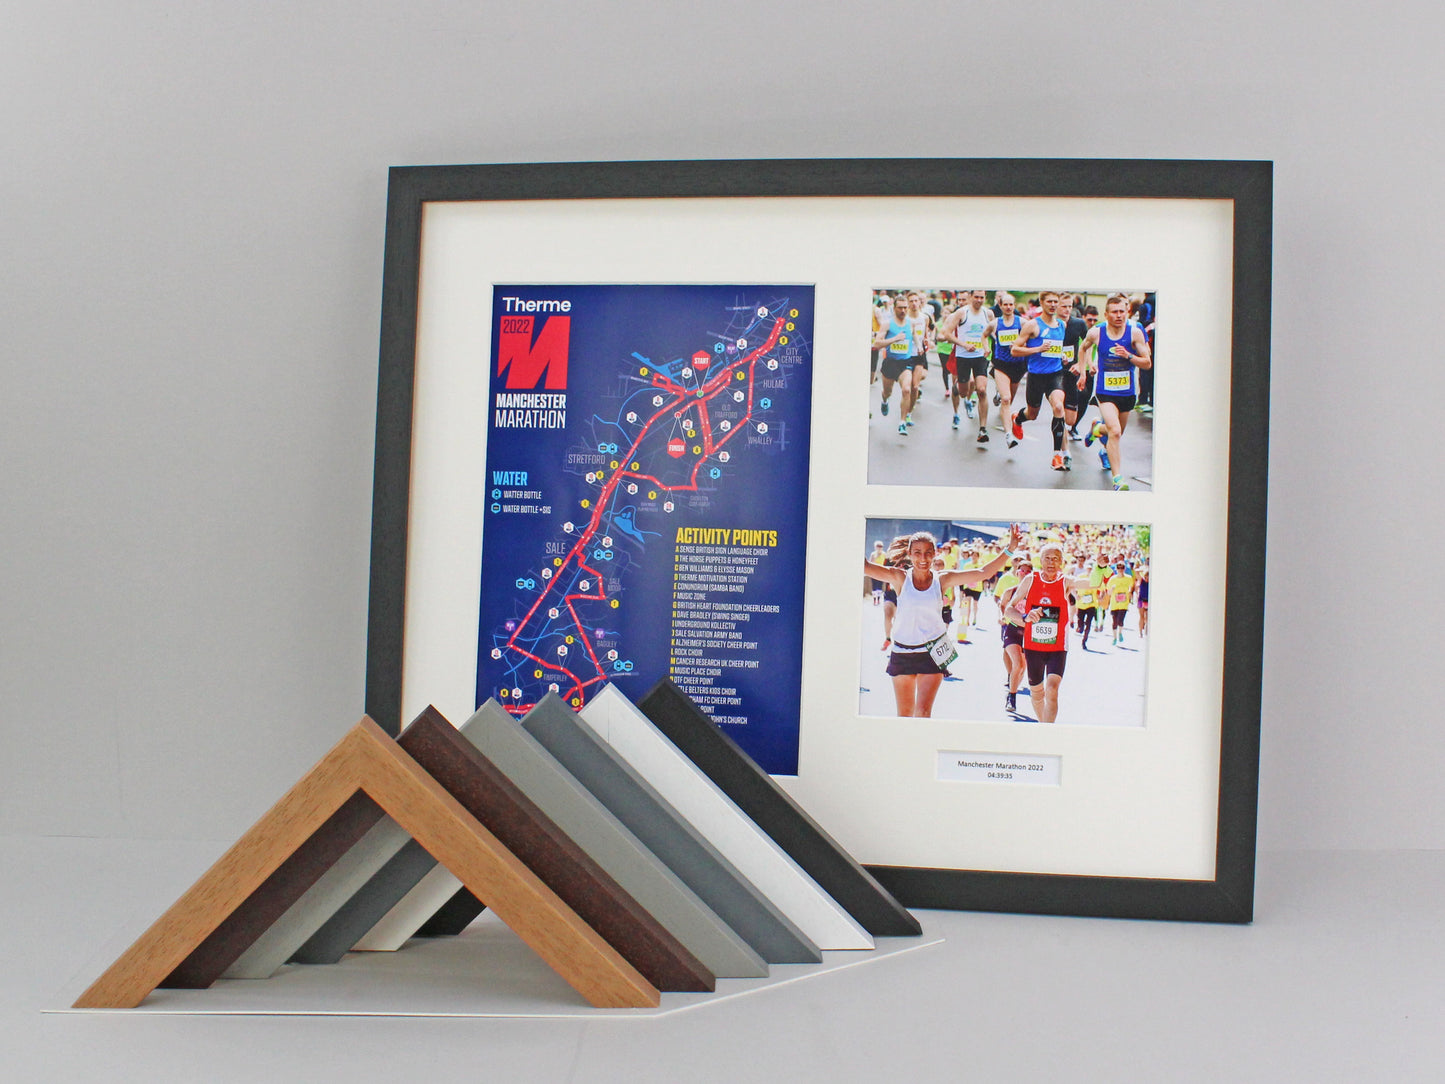 Personalised Certificate Frame with two 5x7"  Photographs. 40x50cm. Perfect for sporting achievements such as Rugby, ballet, fun runs & More